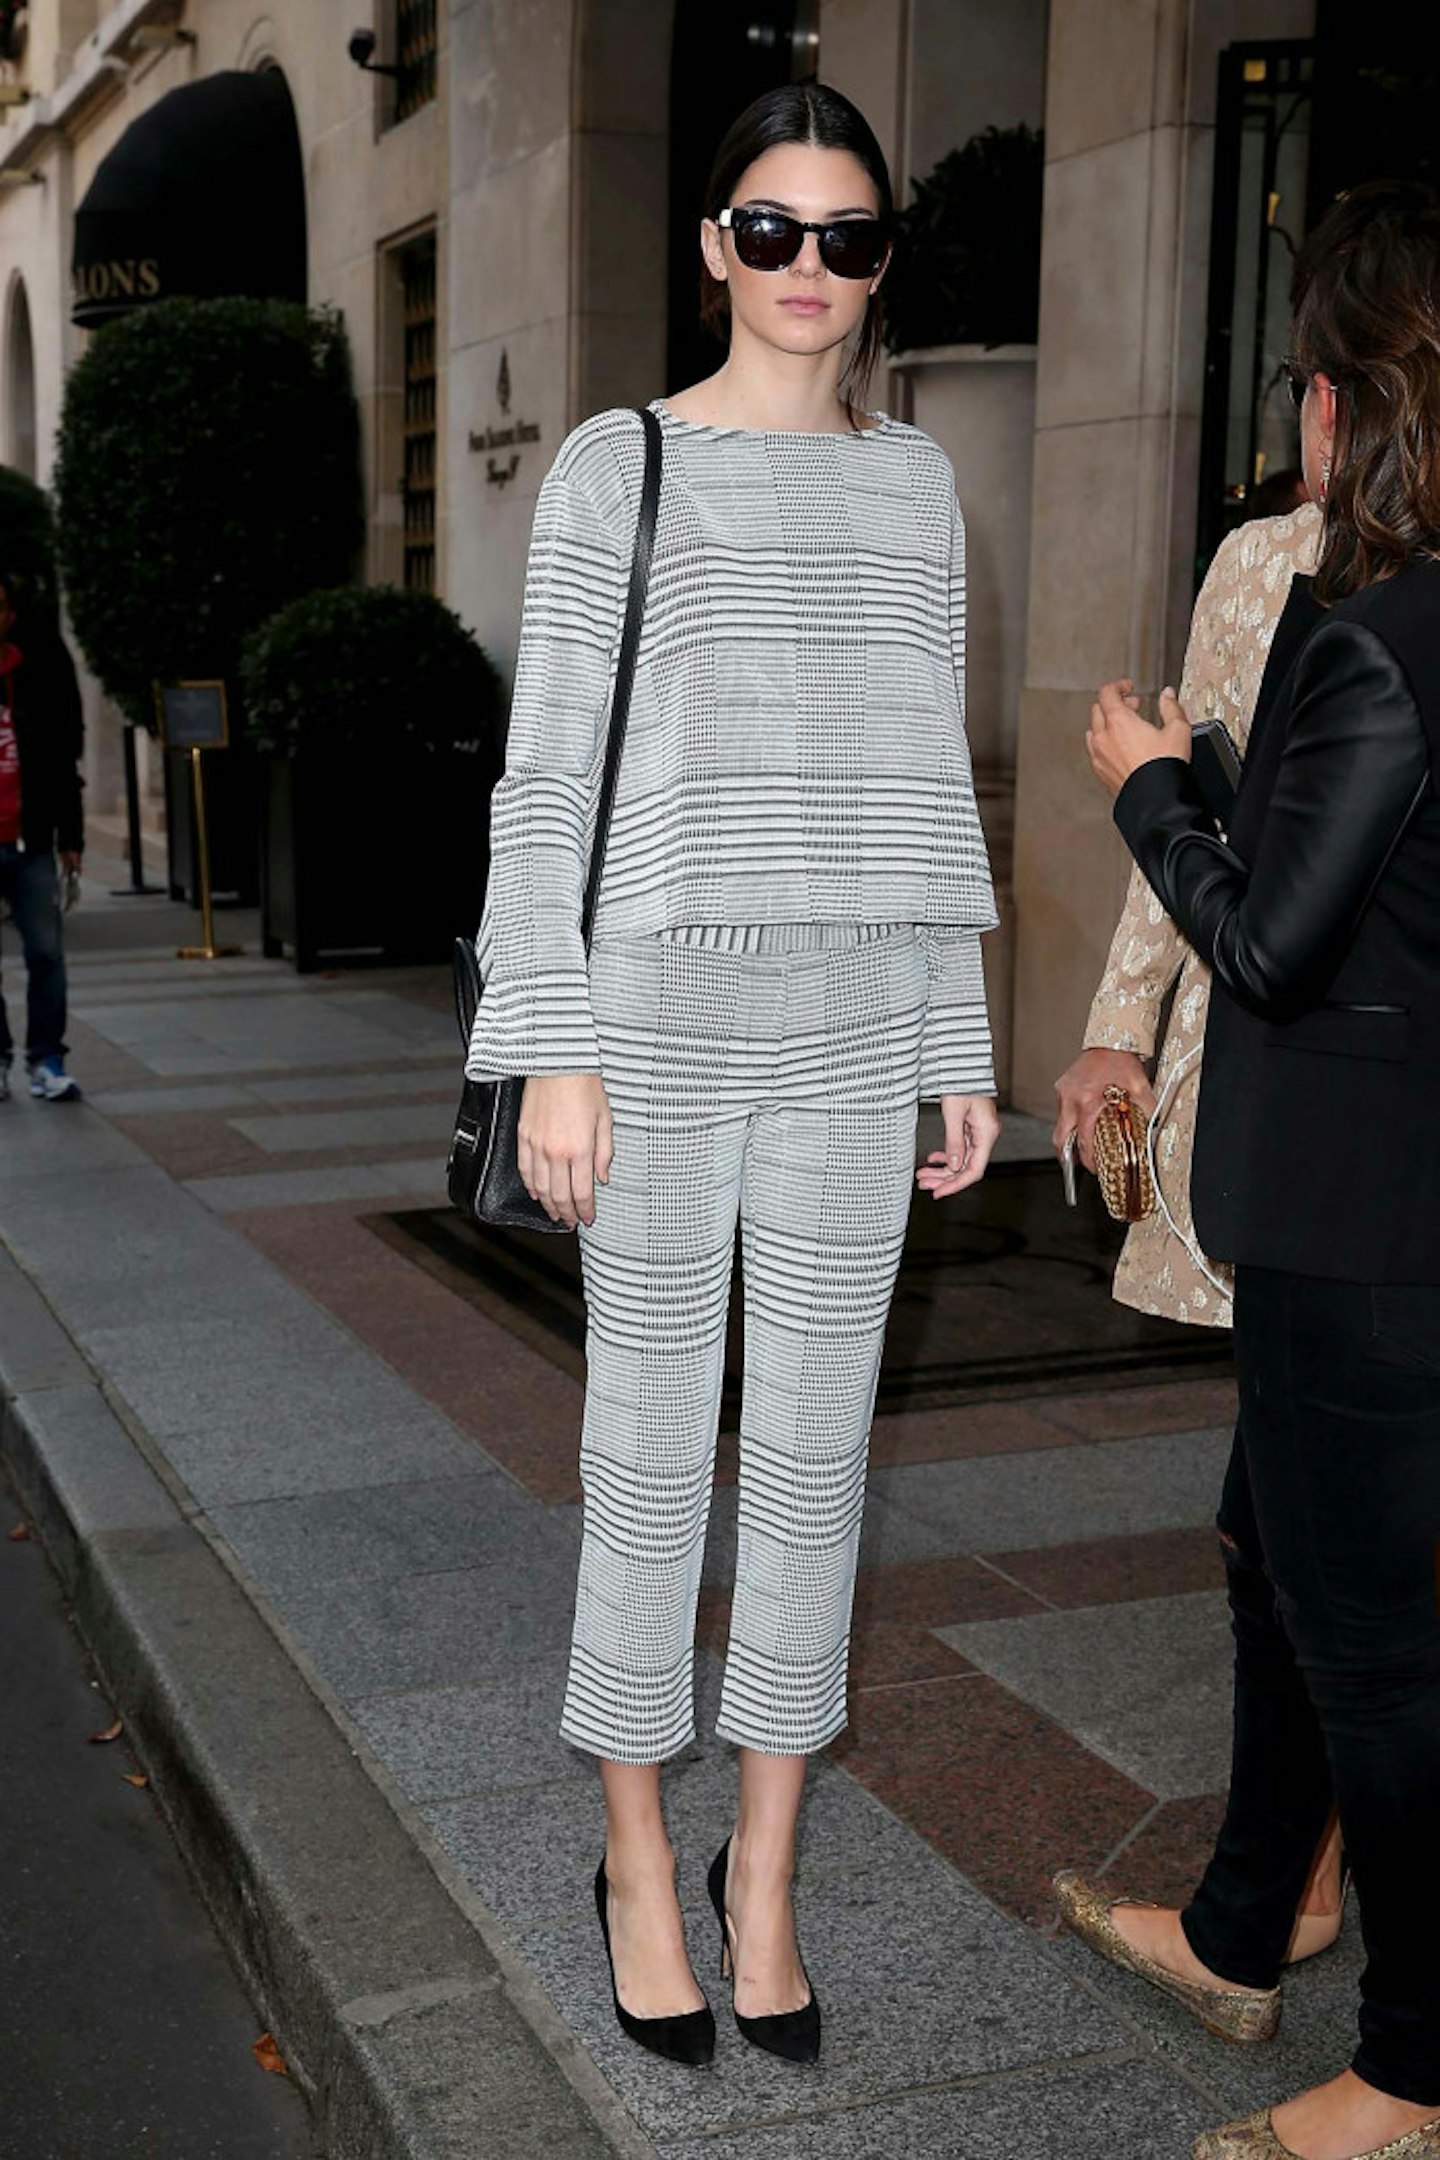 50-Kendall Jenner is sighted as she goes for lunch on September 24, 2014